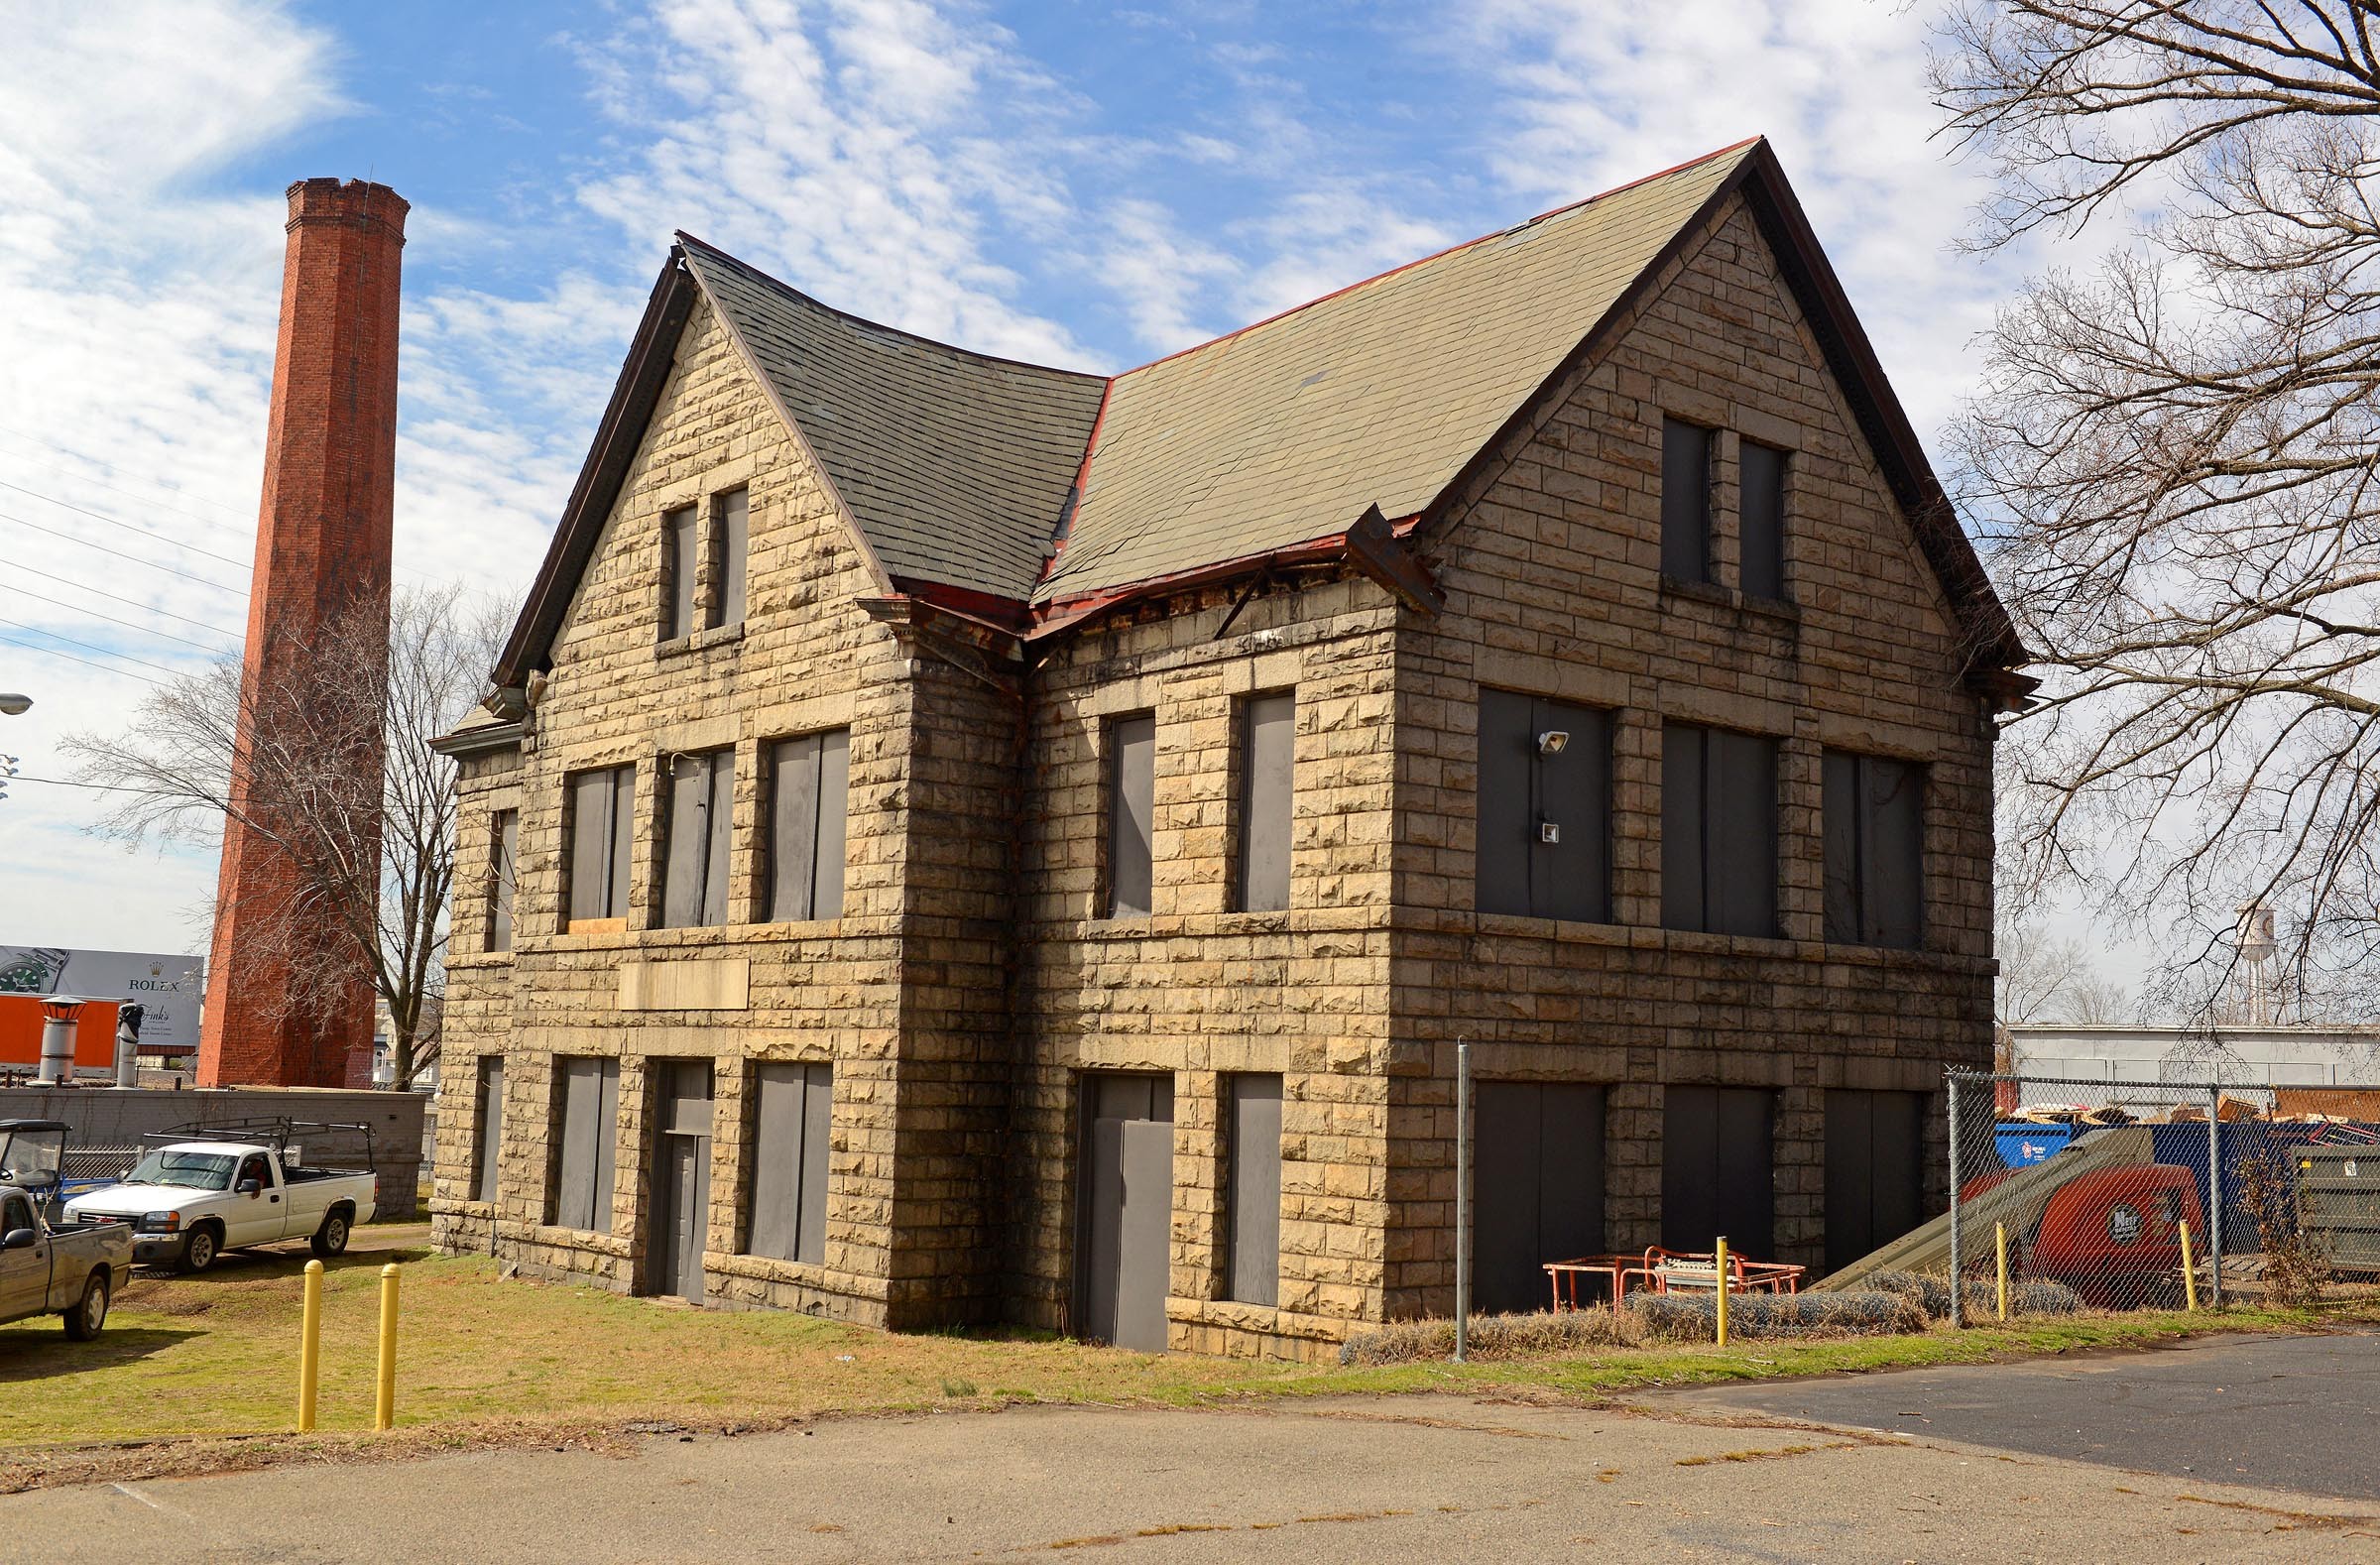 One of the city’s important architectural treasures is the original, late 19th century campus of Virginia Union University. A piece of that legacy, a building where industrial arts were once taught, awaits restoration. - SCOTT ELMQUIST